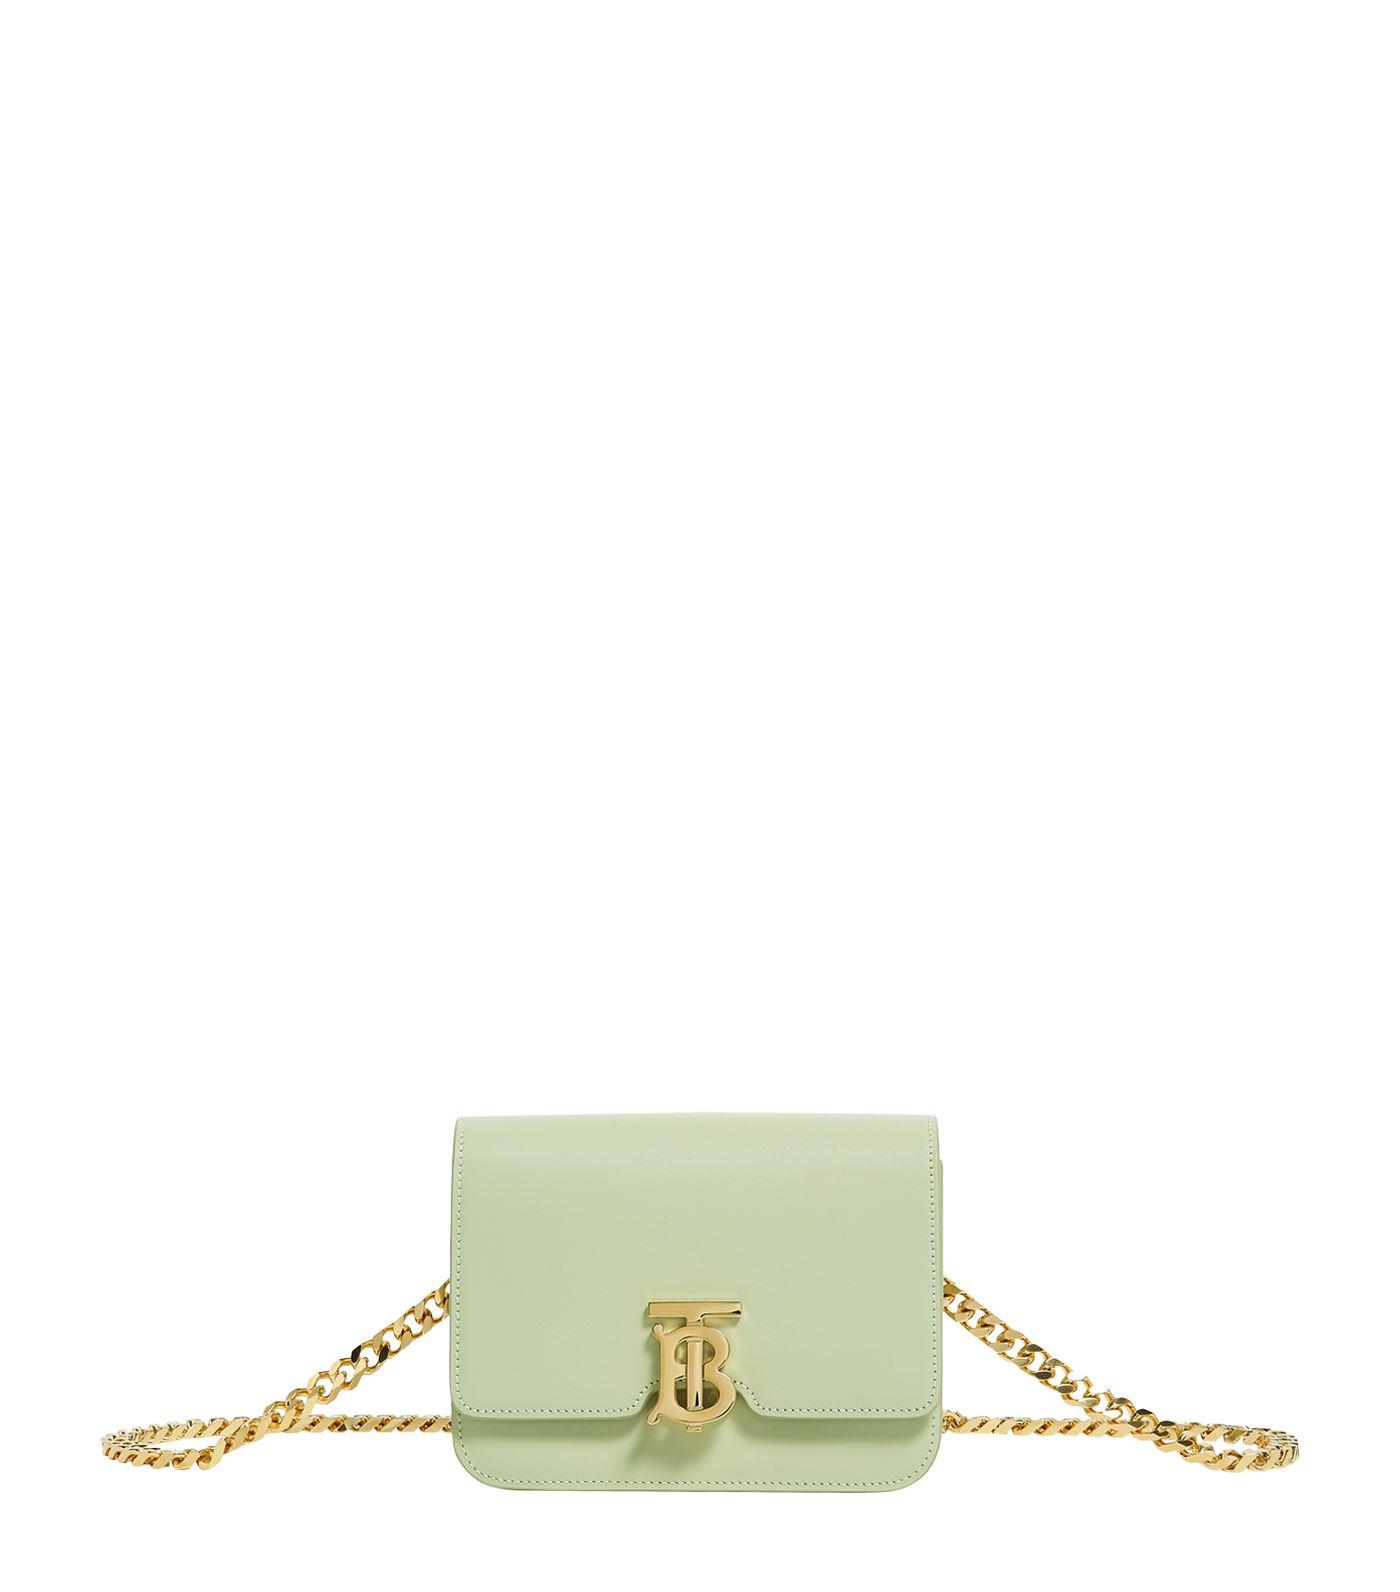 Burberry Leather Tb Belt Bag in Green | Lyst UK